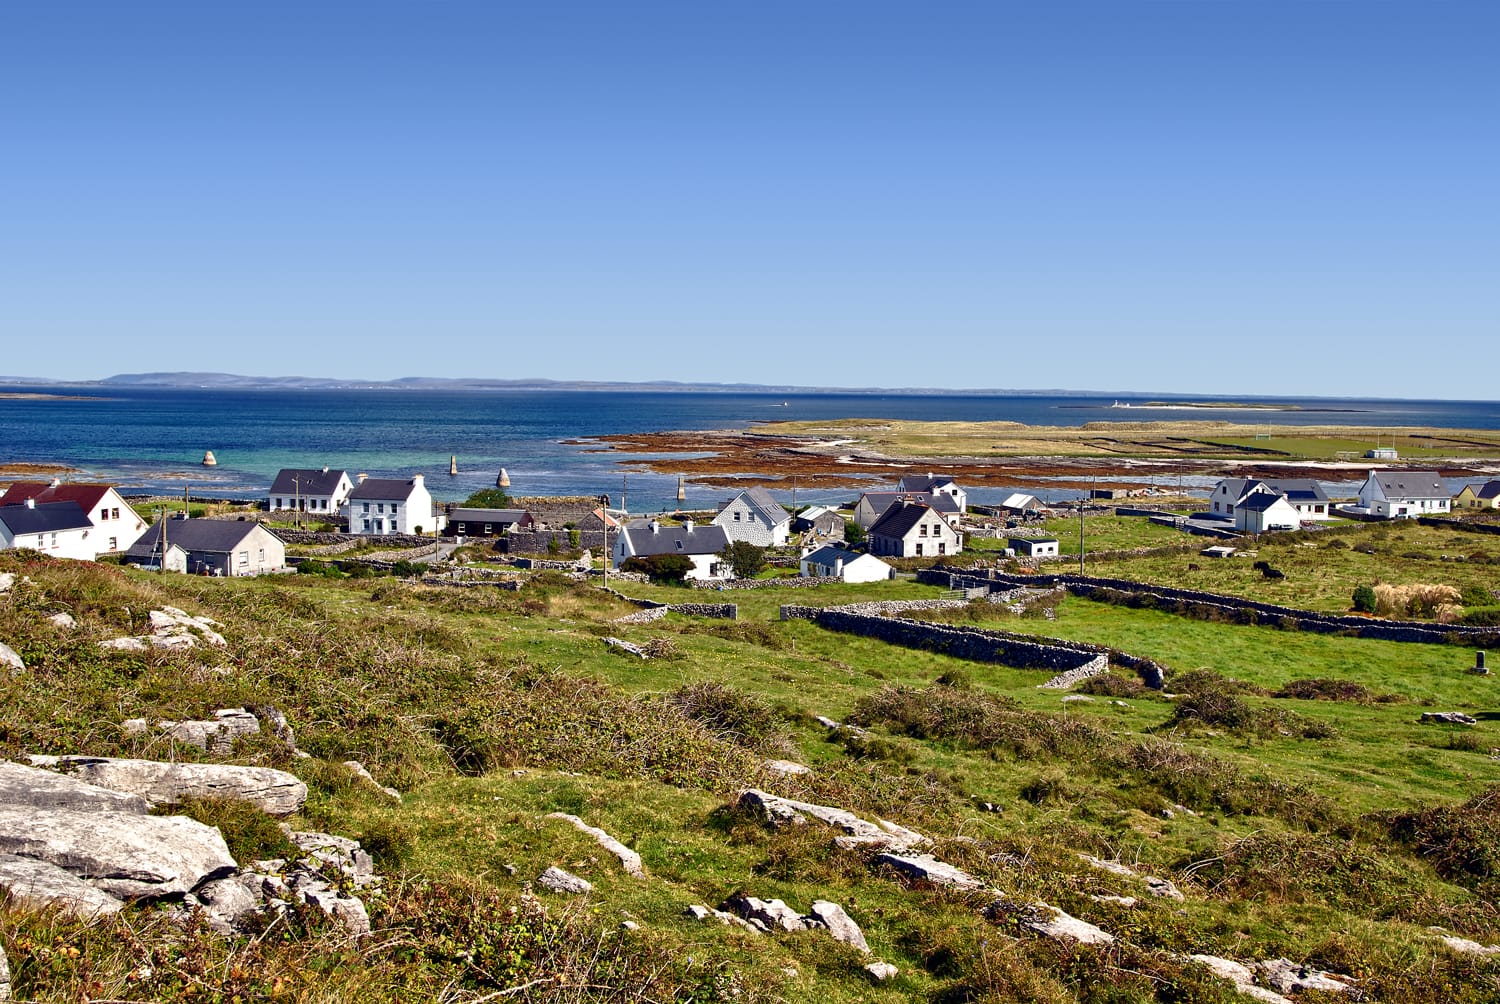 overview of Kileany and the beautiful landscape of Inis Mór Island, Ireland.